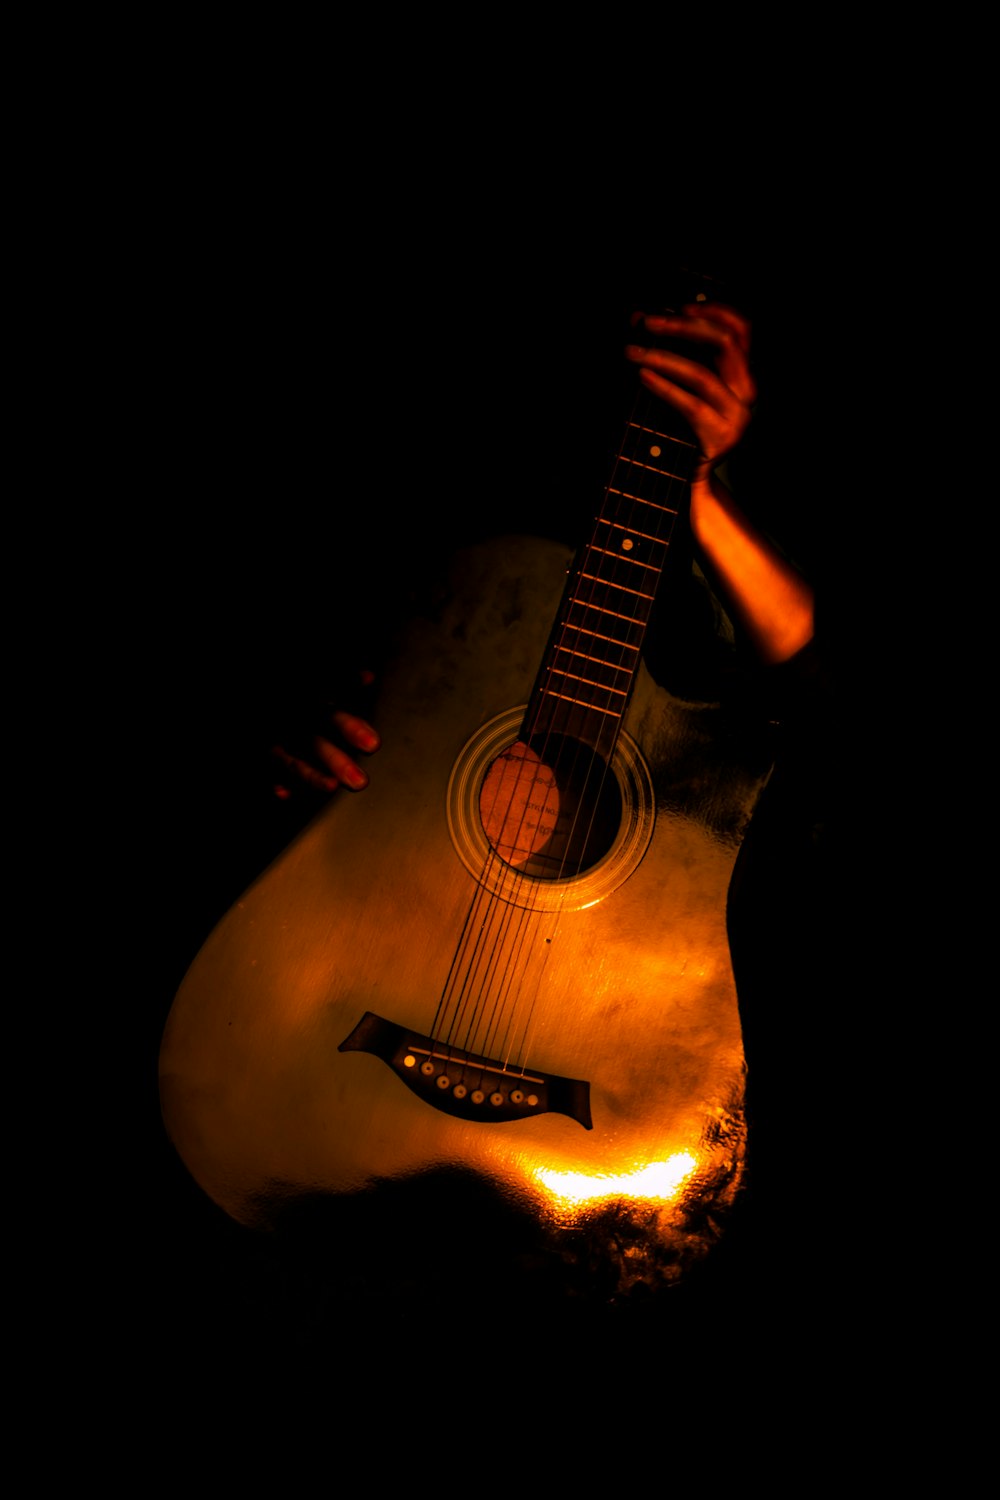 brown acoustic guitar on black background